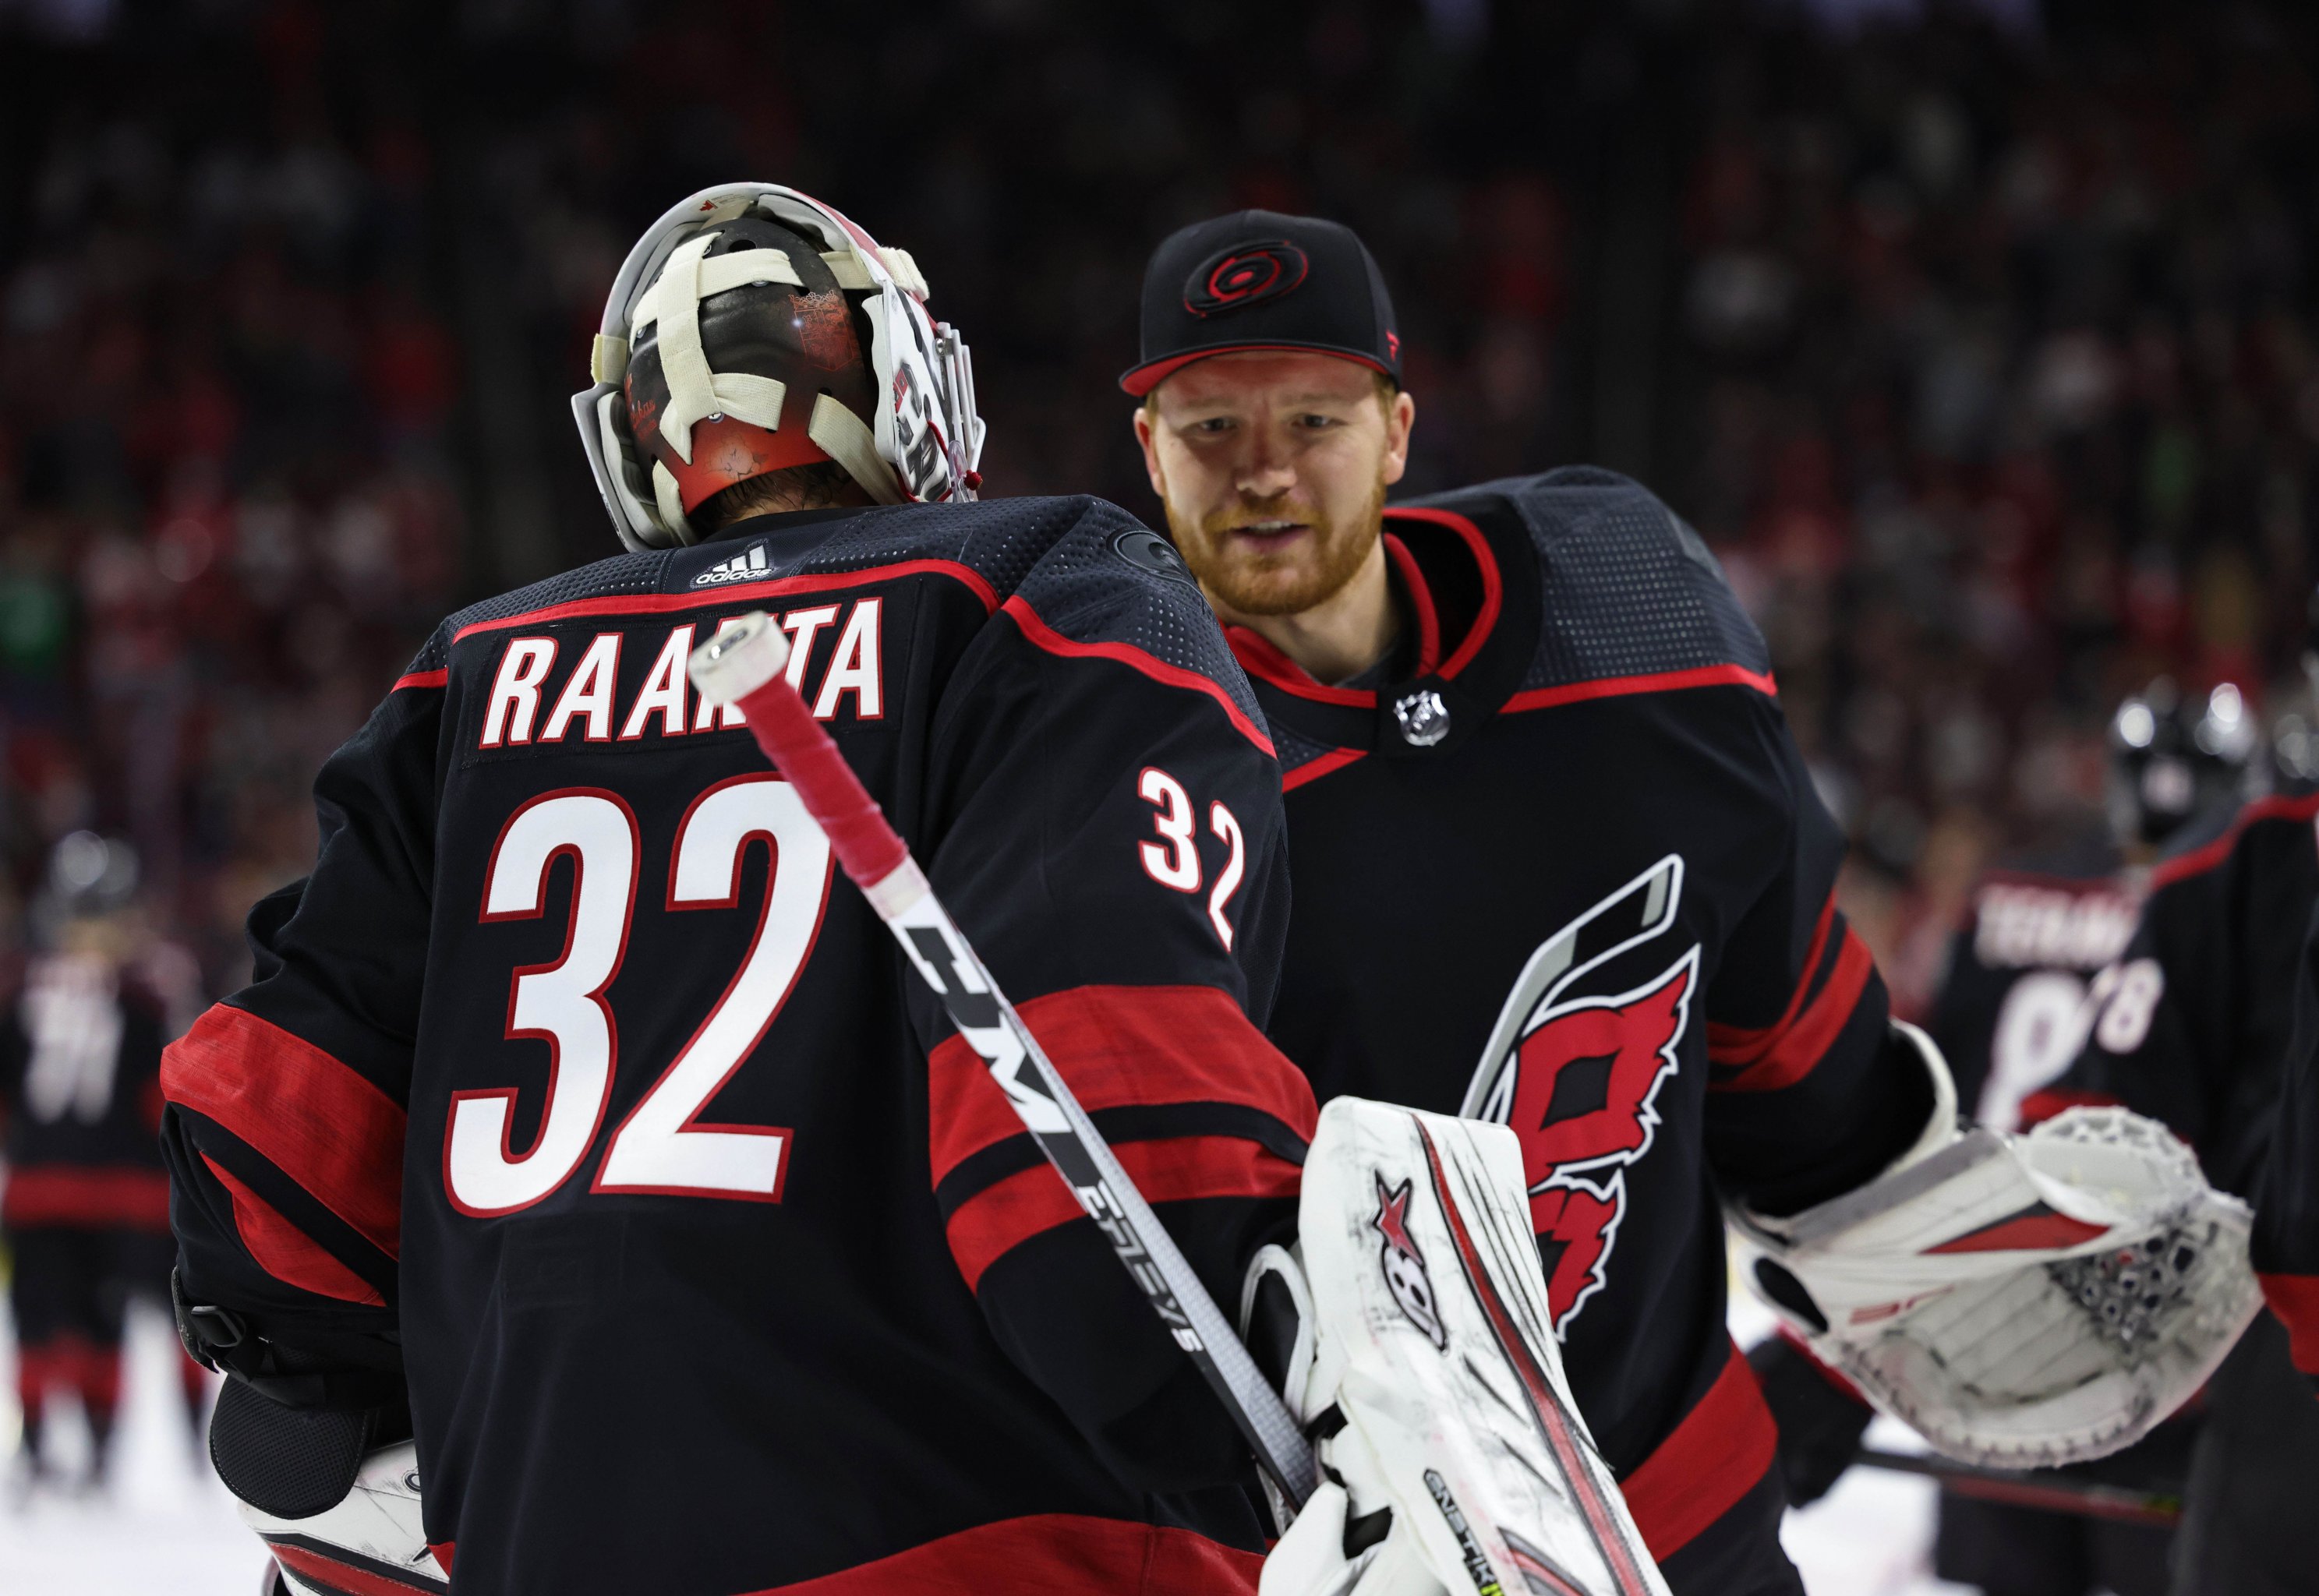 Goalie Power Rankings: Every NHL Team's Tandem from 32 to 1